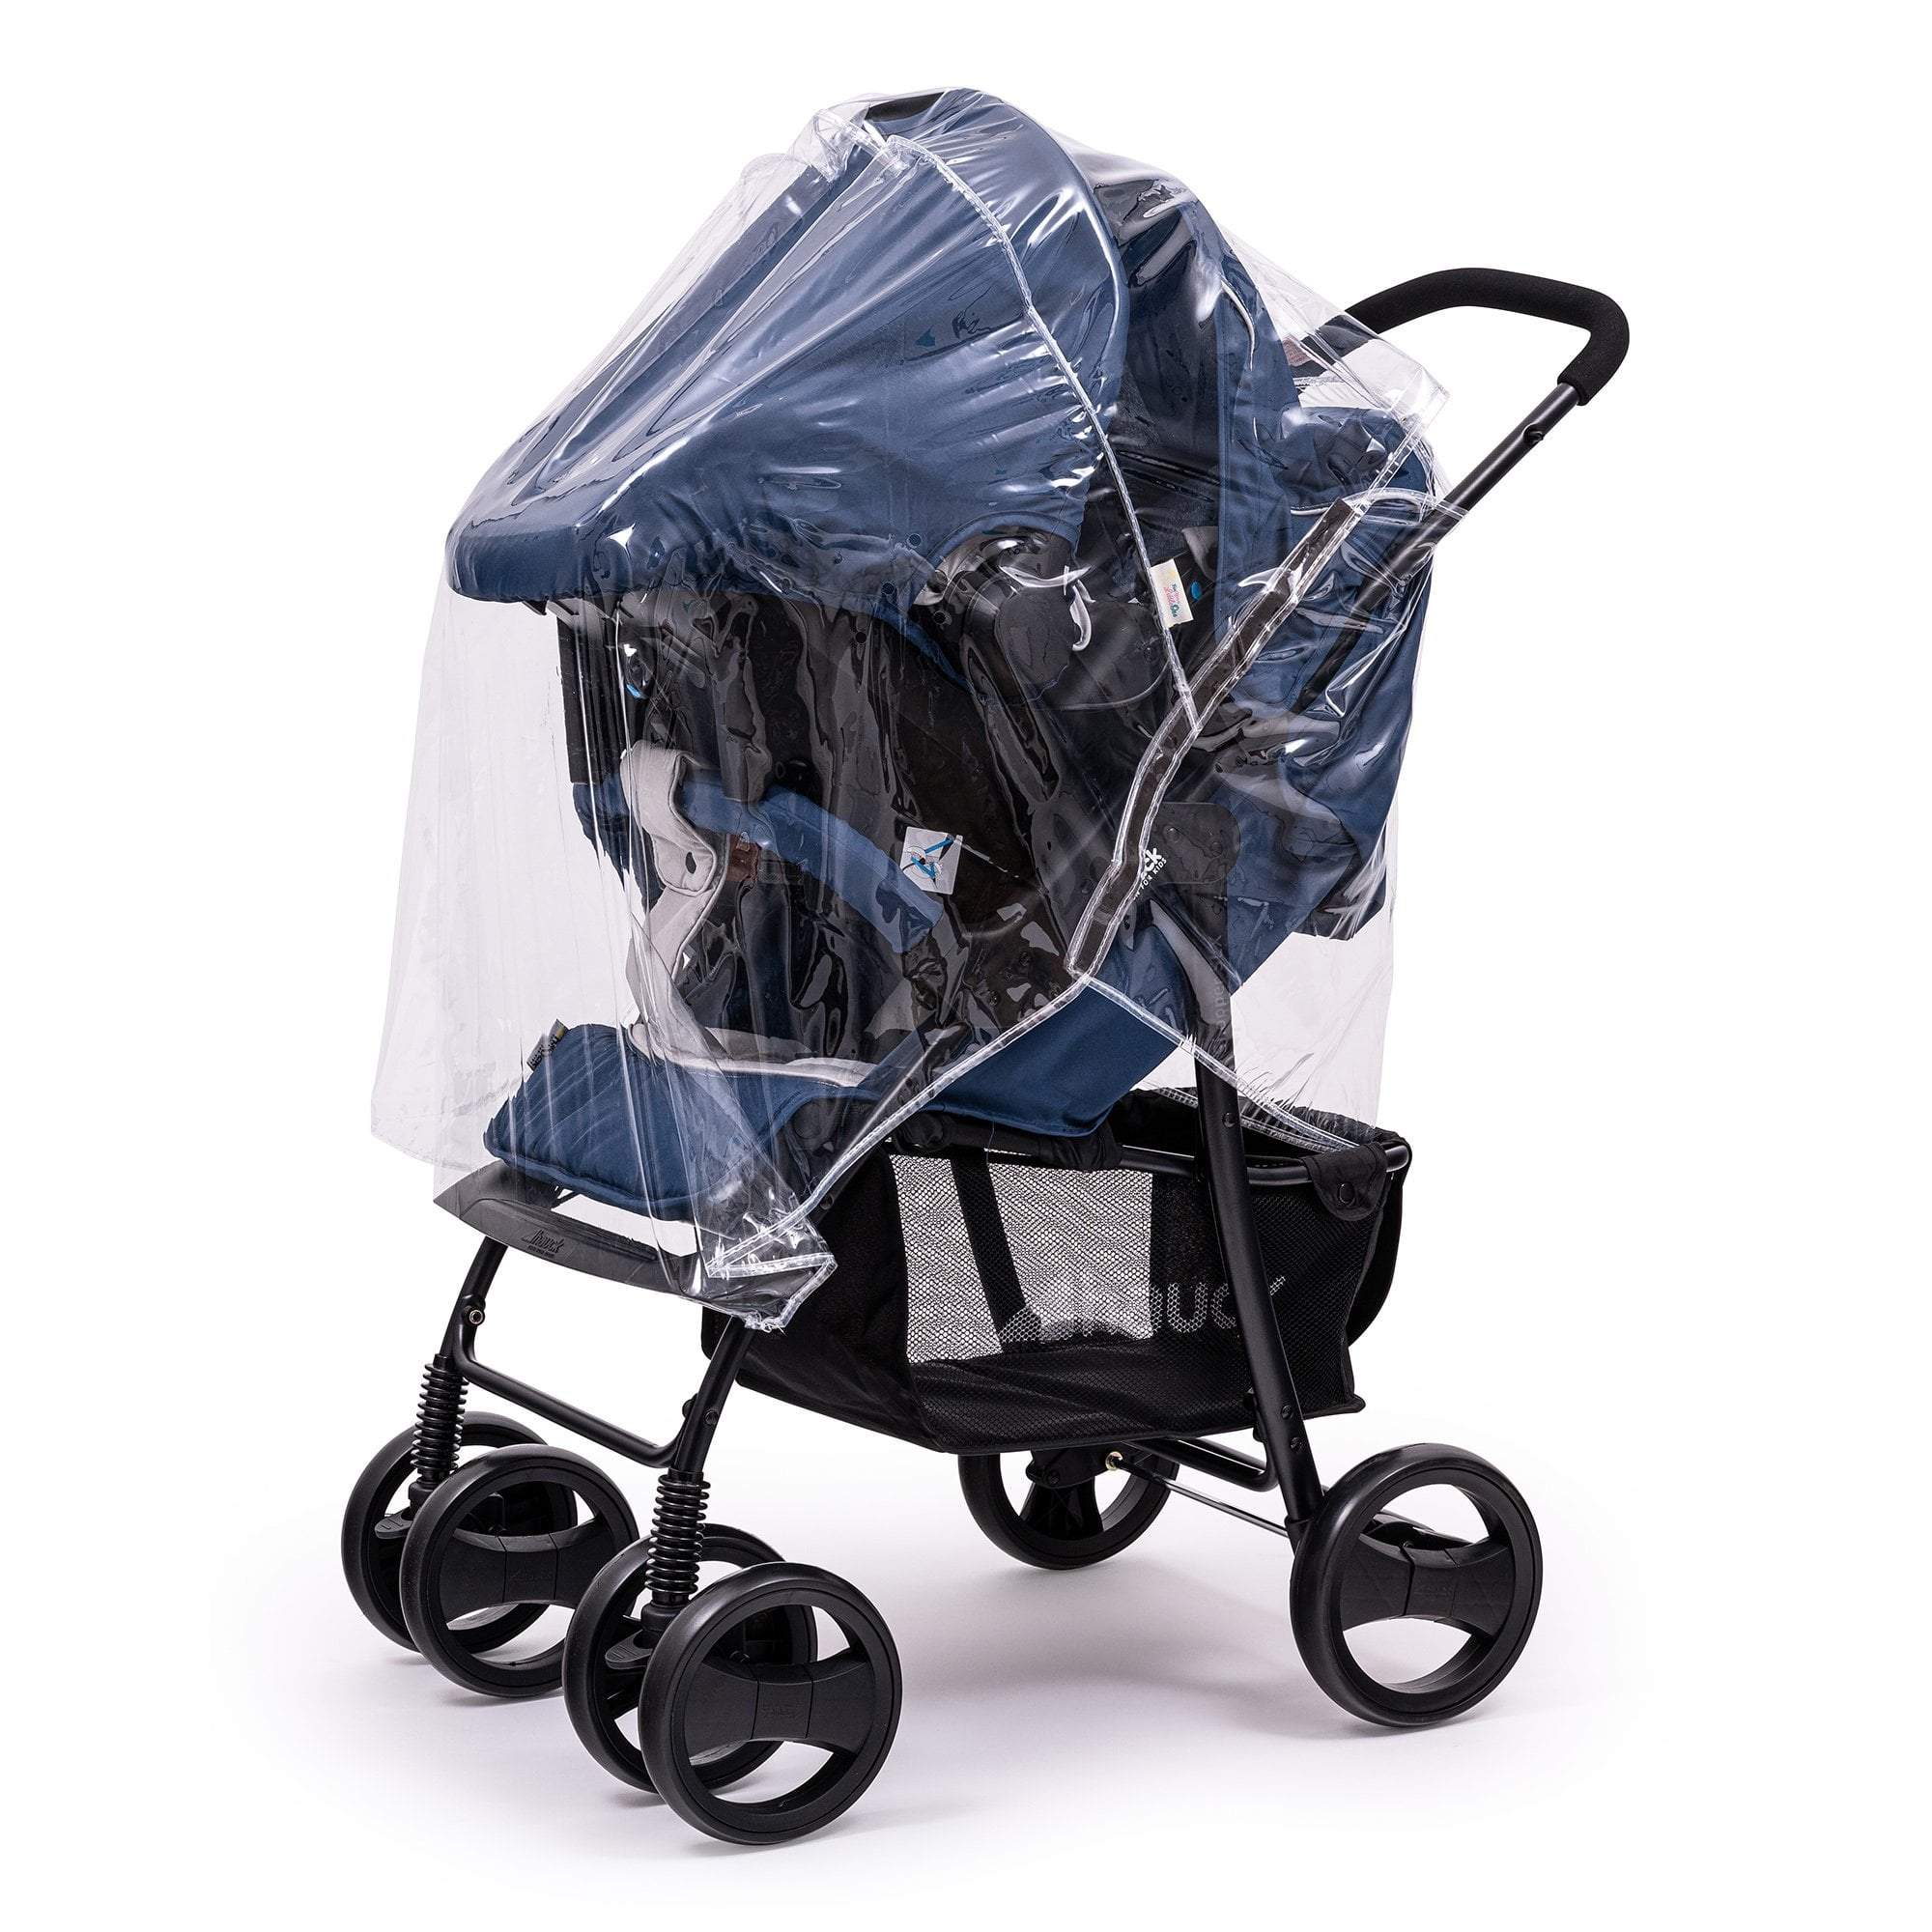 Travel System Raincover Compatible with Babybus - Fits All Models -  | For Your Little One